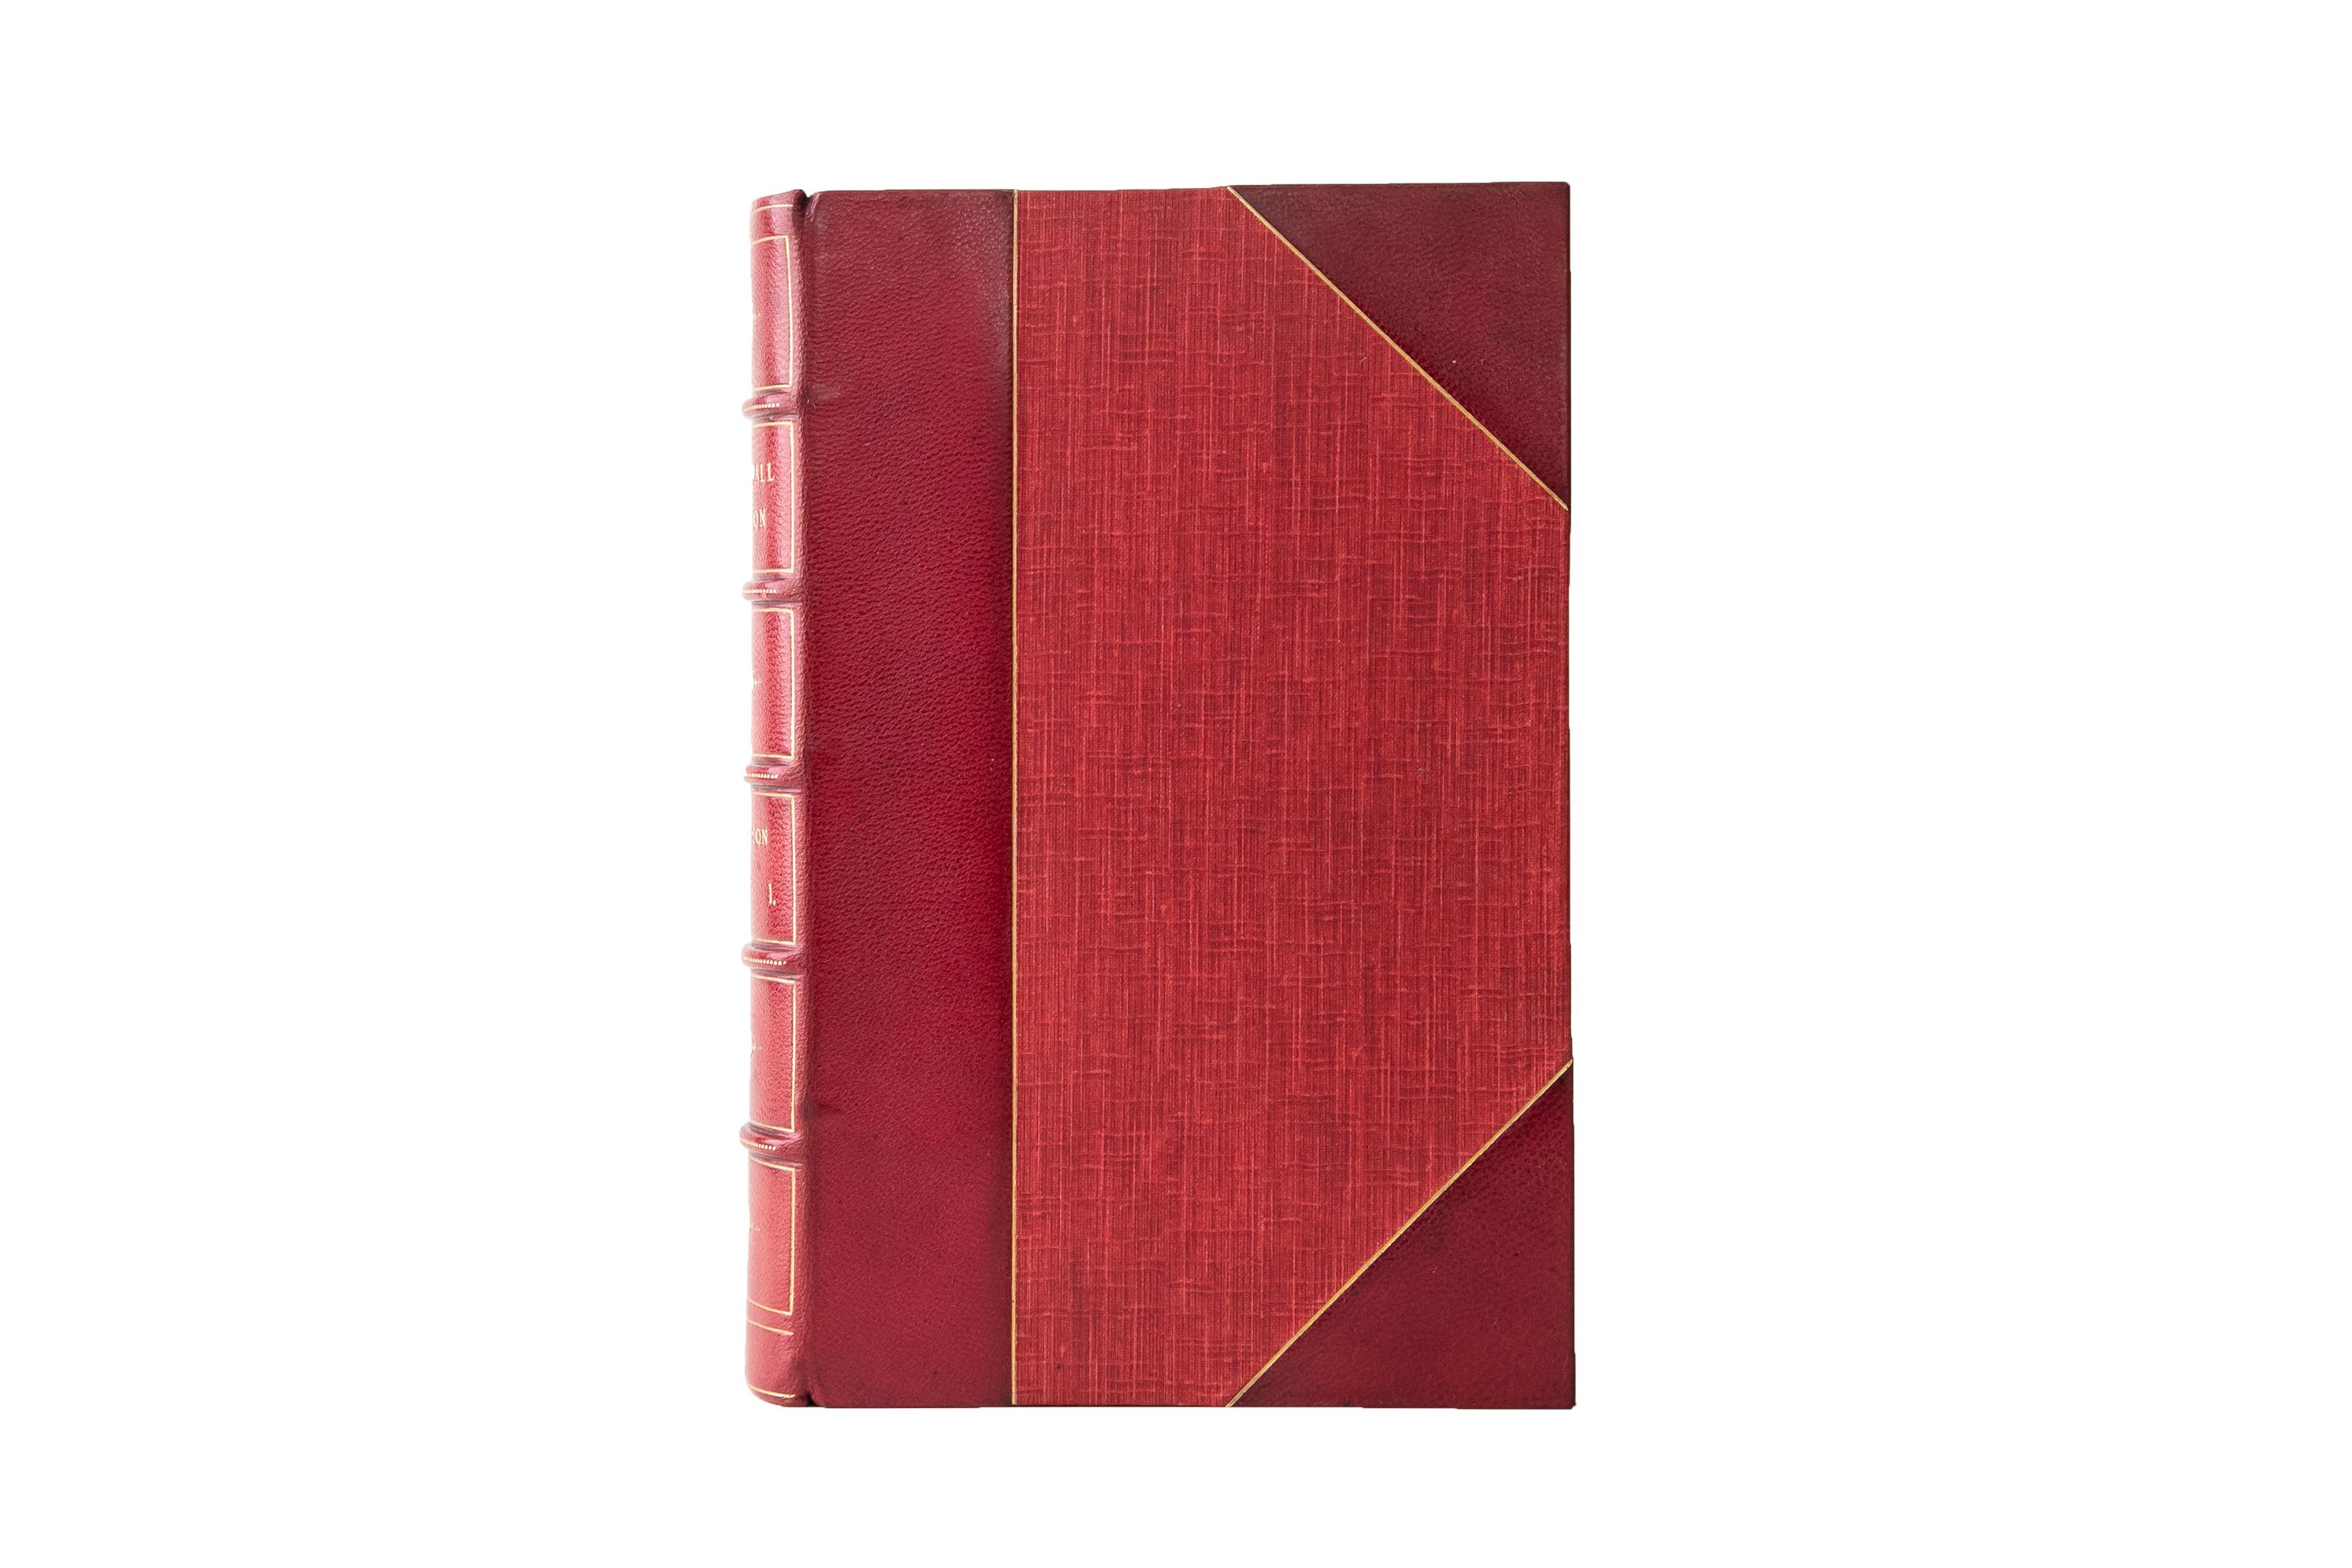 2 Volumes. George F.R. Henderson, Stonewall Jackson and the American Civil War. First Edition. Bound in 3/4 red morocco and linen boards, bordered in gilt-tooling. The spines display raised bands, label lettering, floral panel details, and